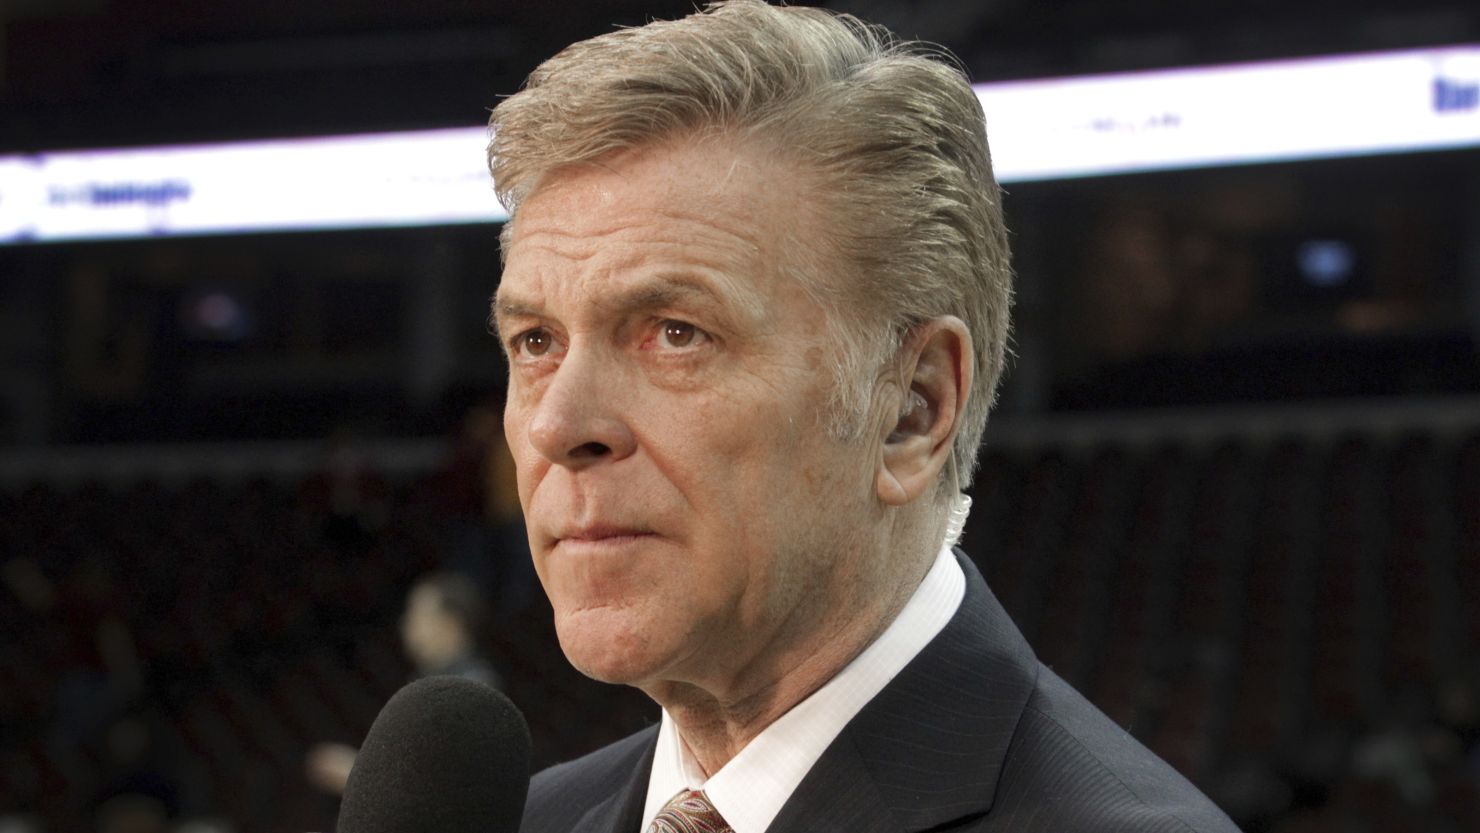 Fred McLeod was about to start his 14th consecutive season as the Cleveland Cavalier's play-by-play announcer.